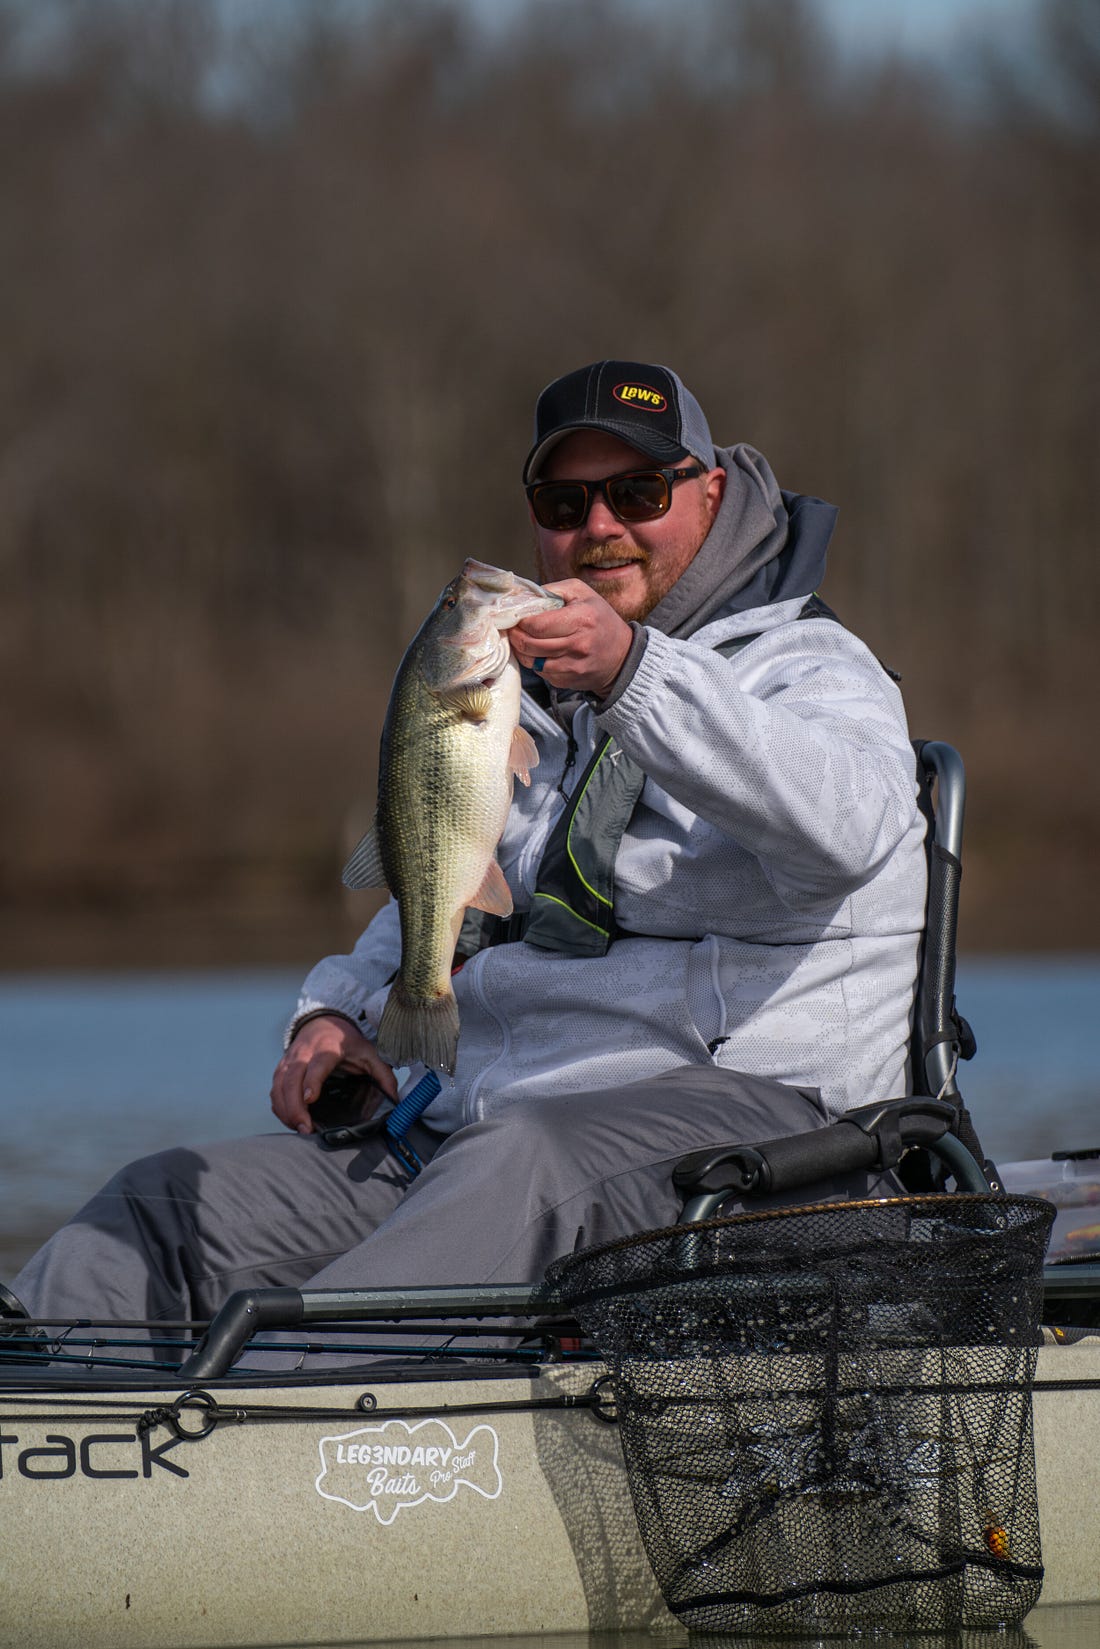  Day one leader, Drew Duncan, feeling good with this one in the boat! 